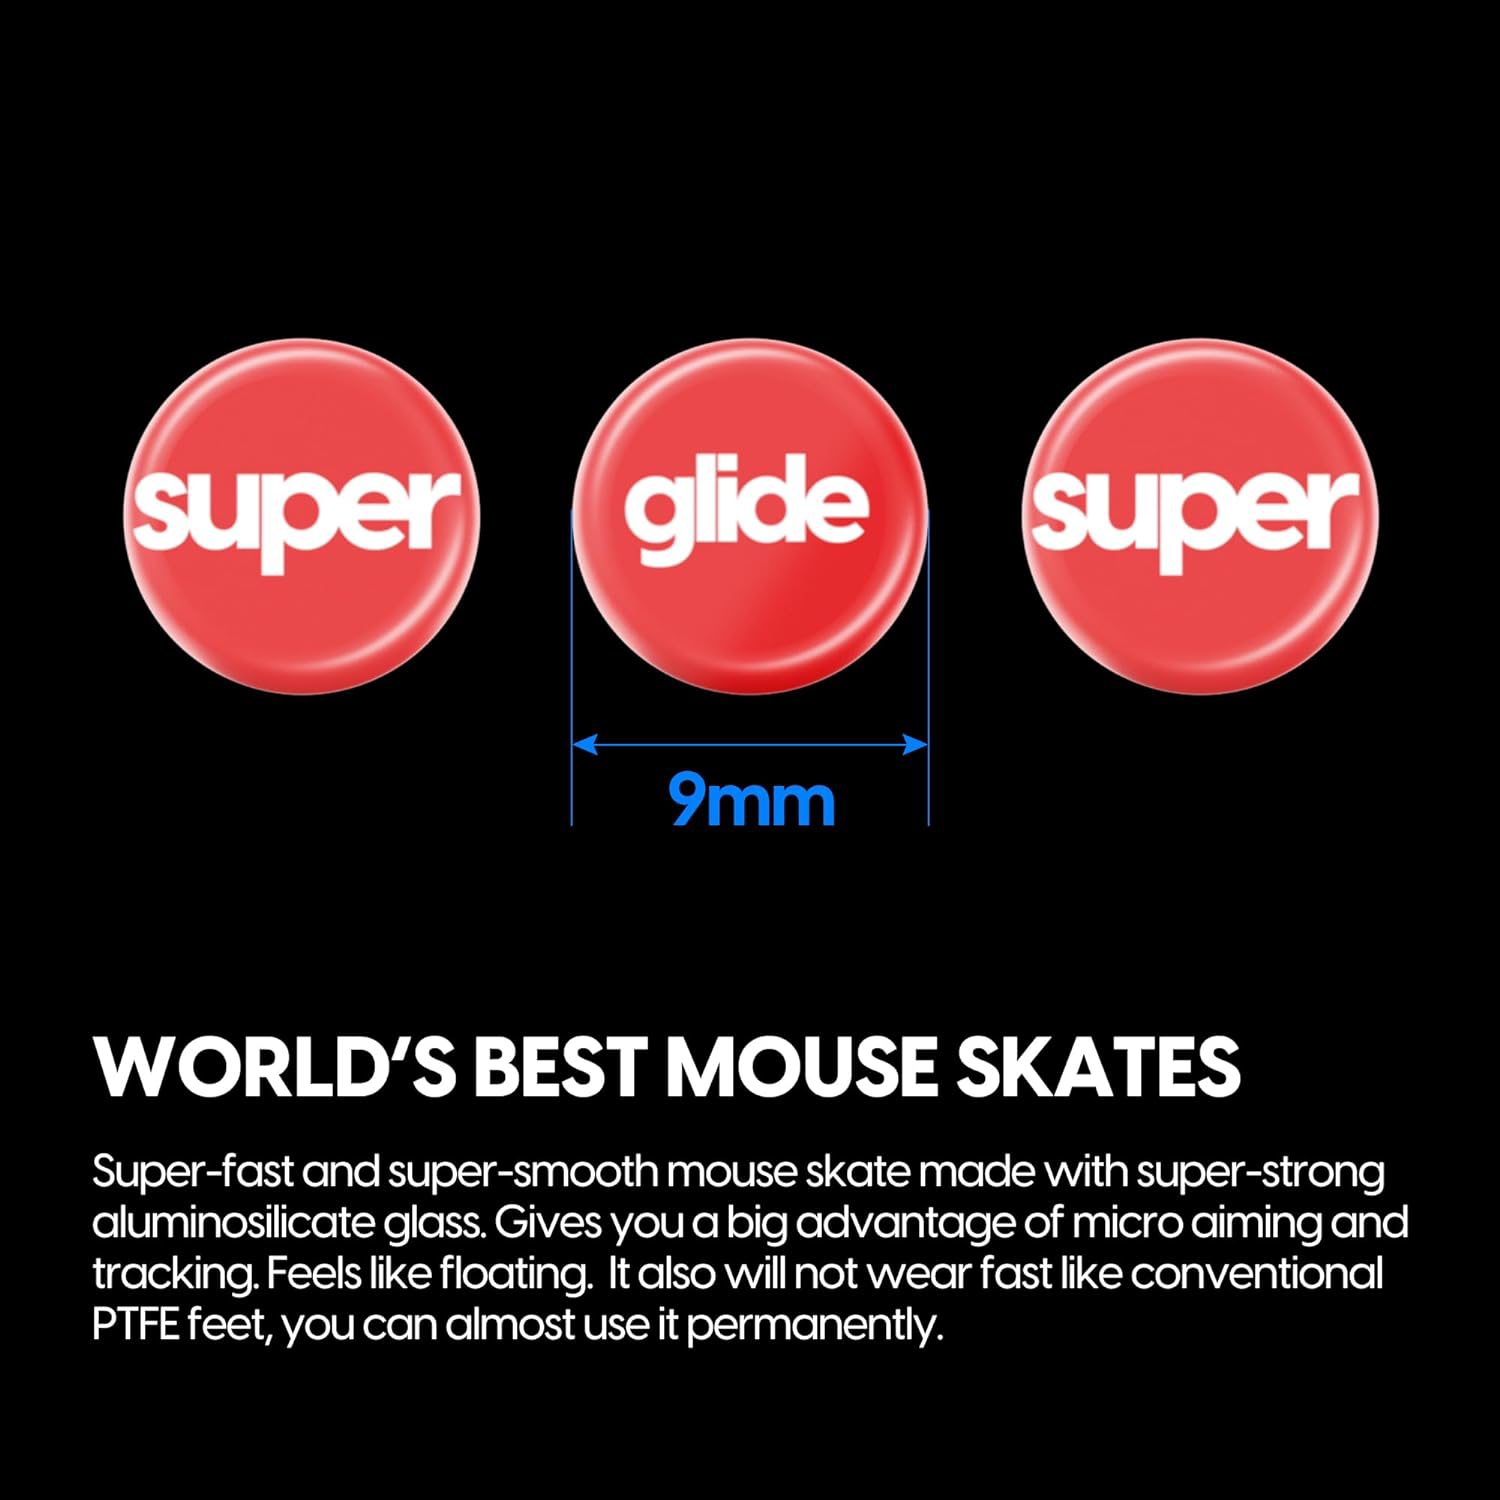 A large marketing image providing additional information about the product Pulsar Superglide 2 Dot Skates for Universal 9mm x 6 - Red - Additional alt info not provided